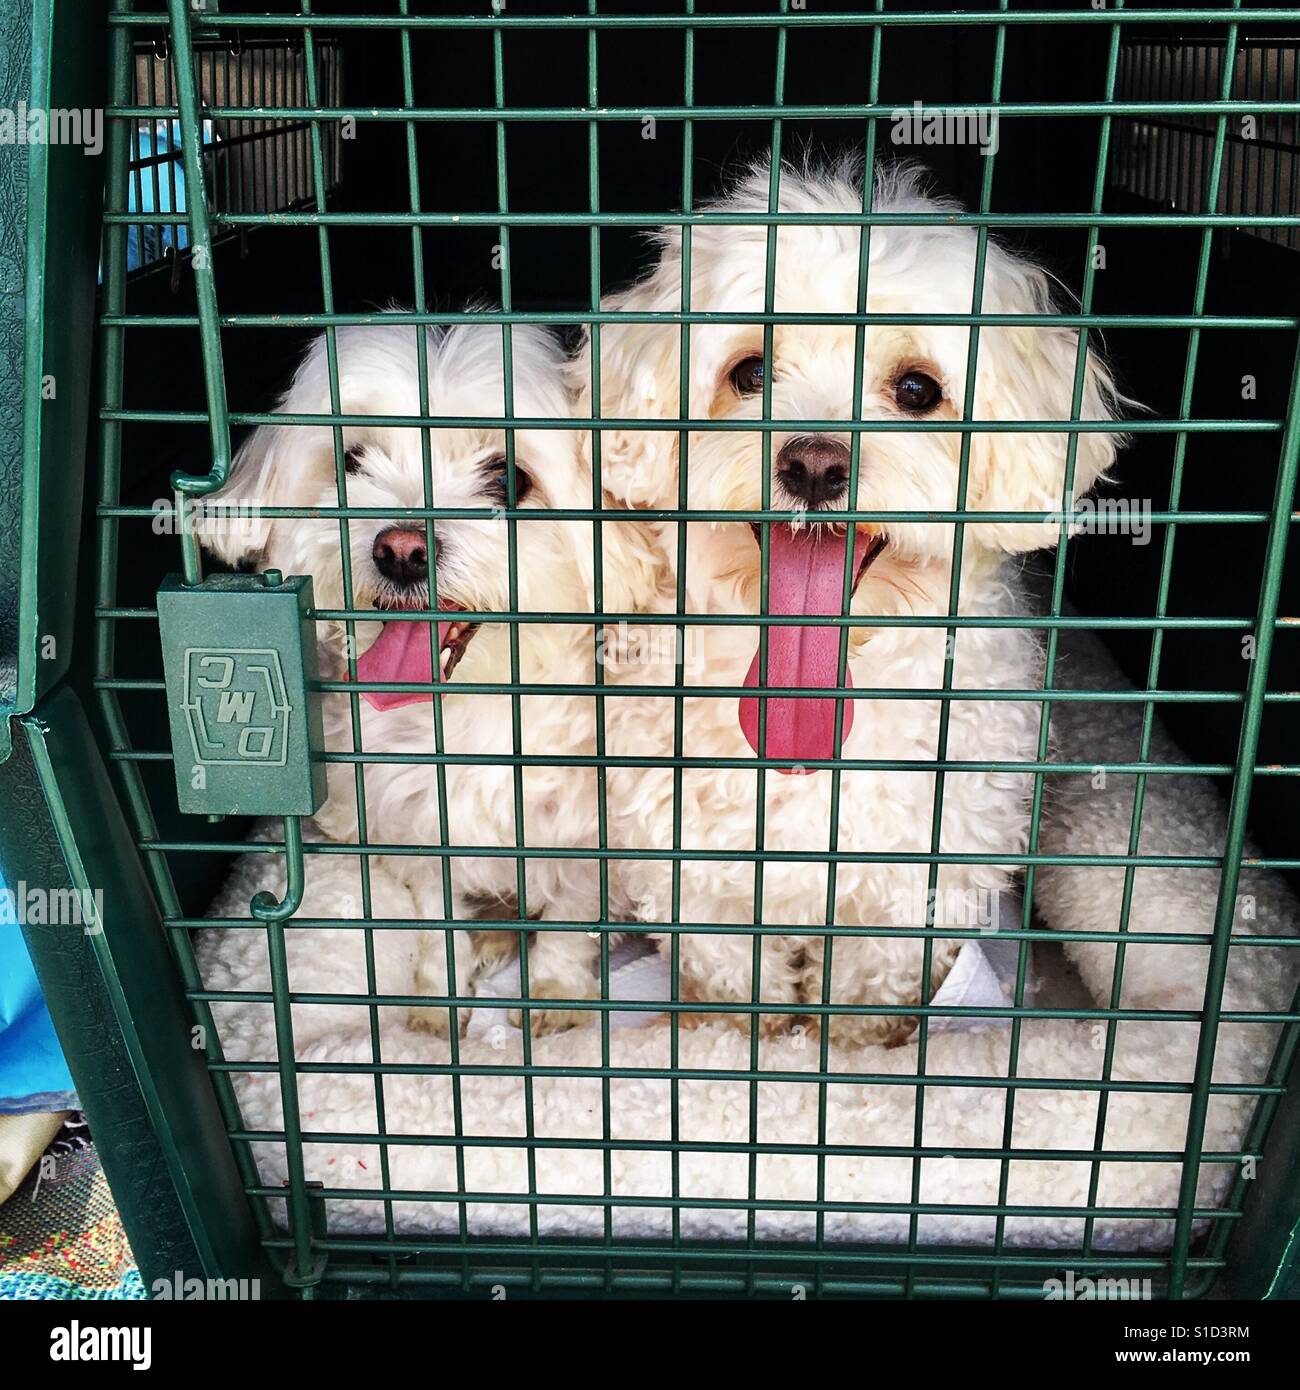 My moms 2 Maltese dogs going to the groomer Stock Photo